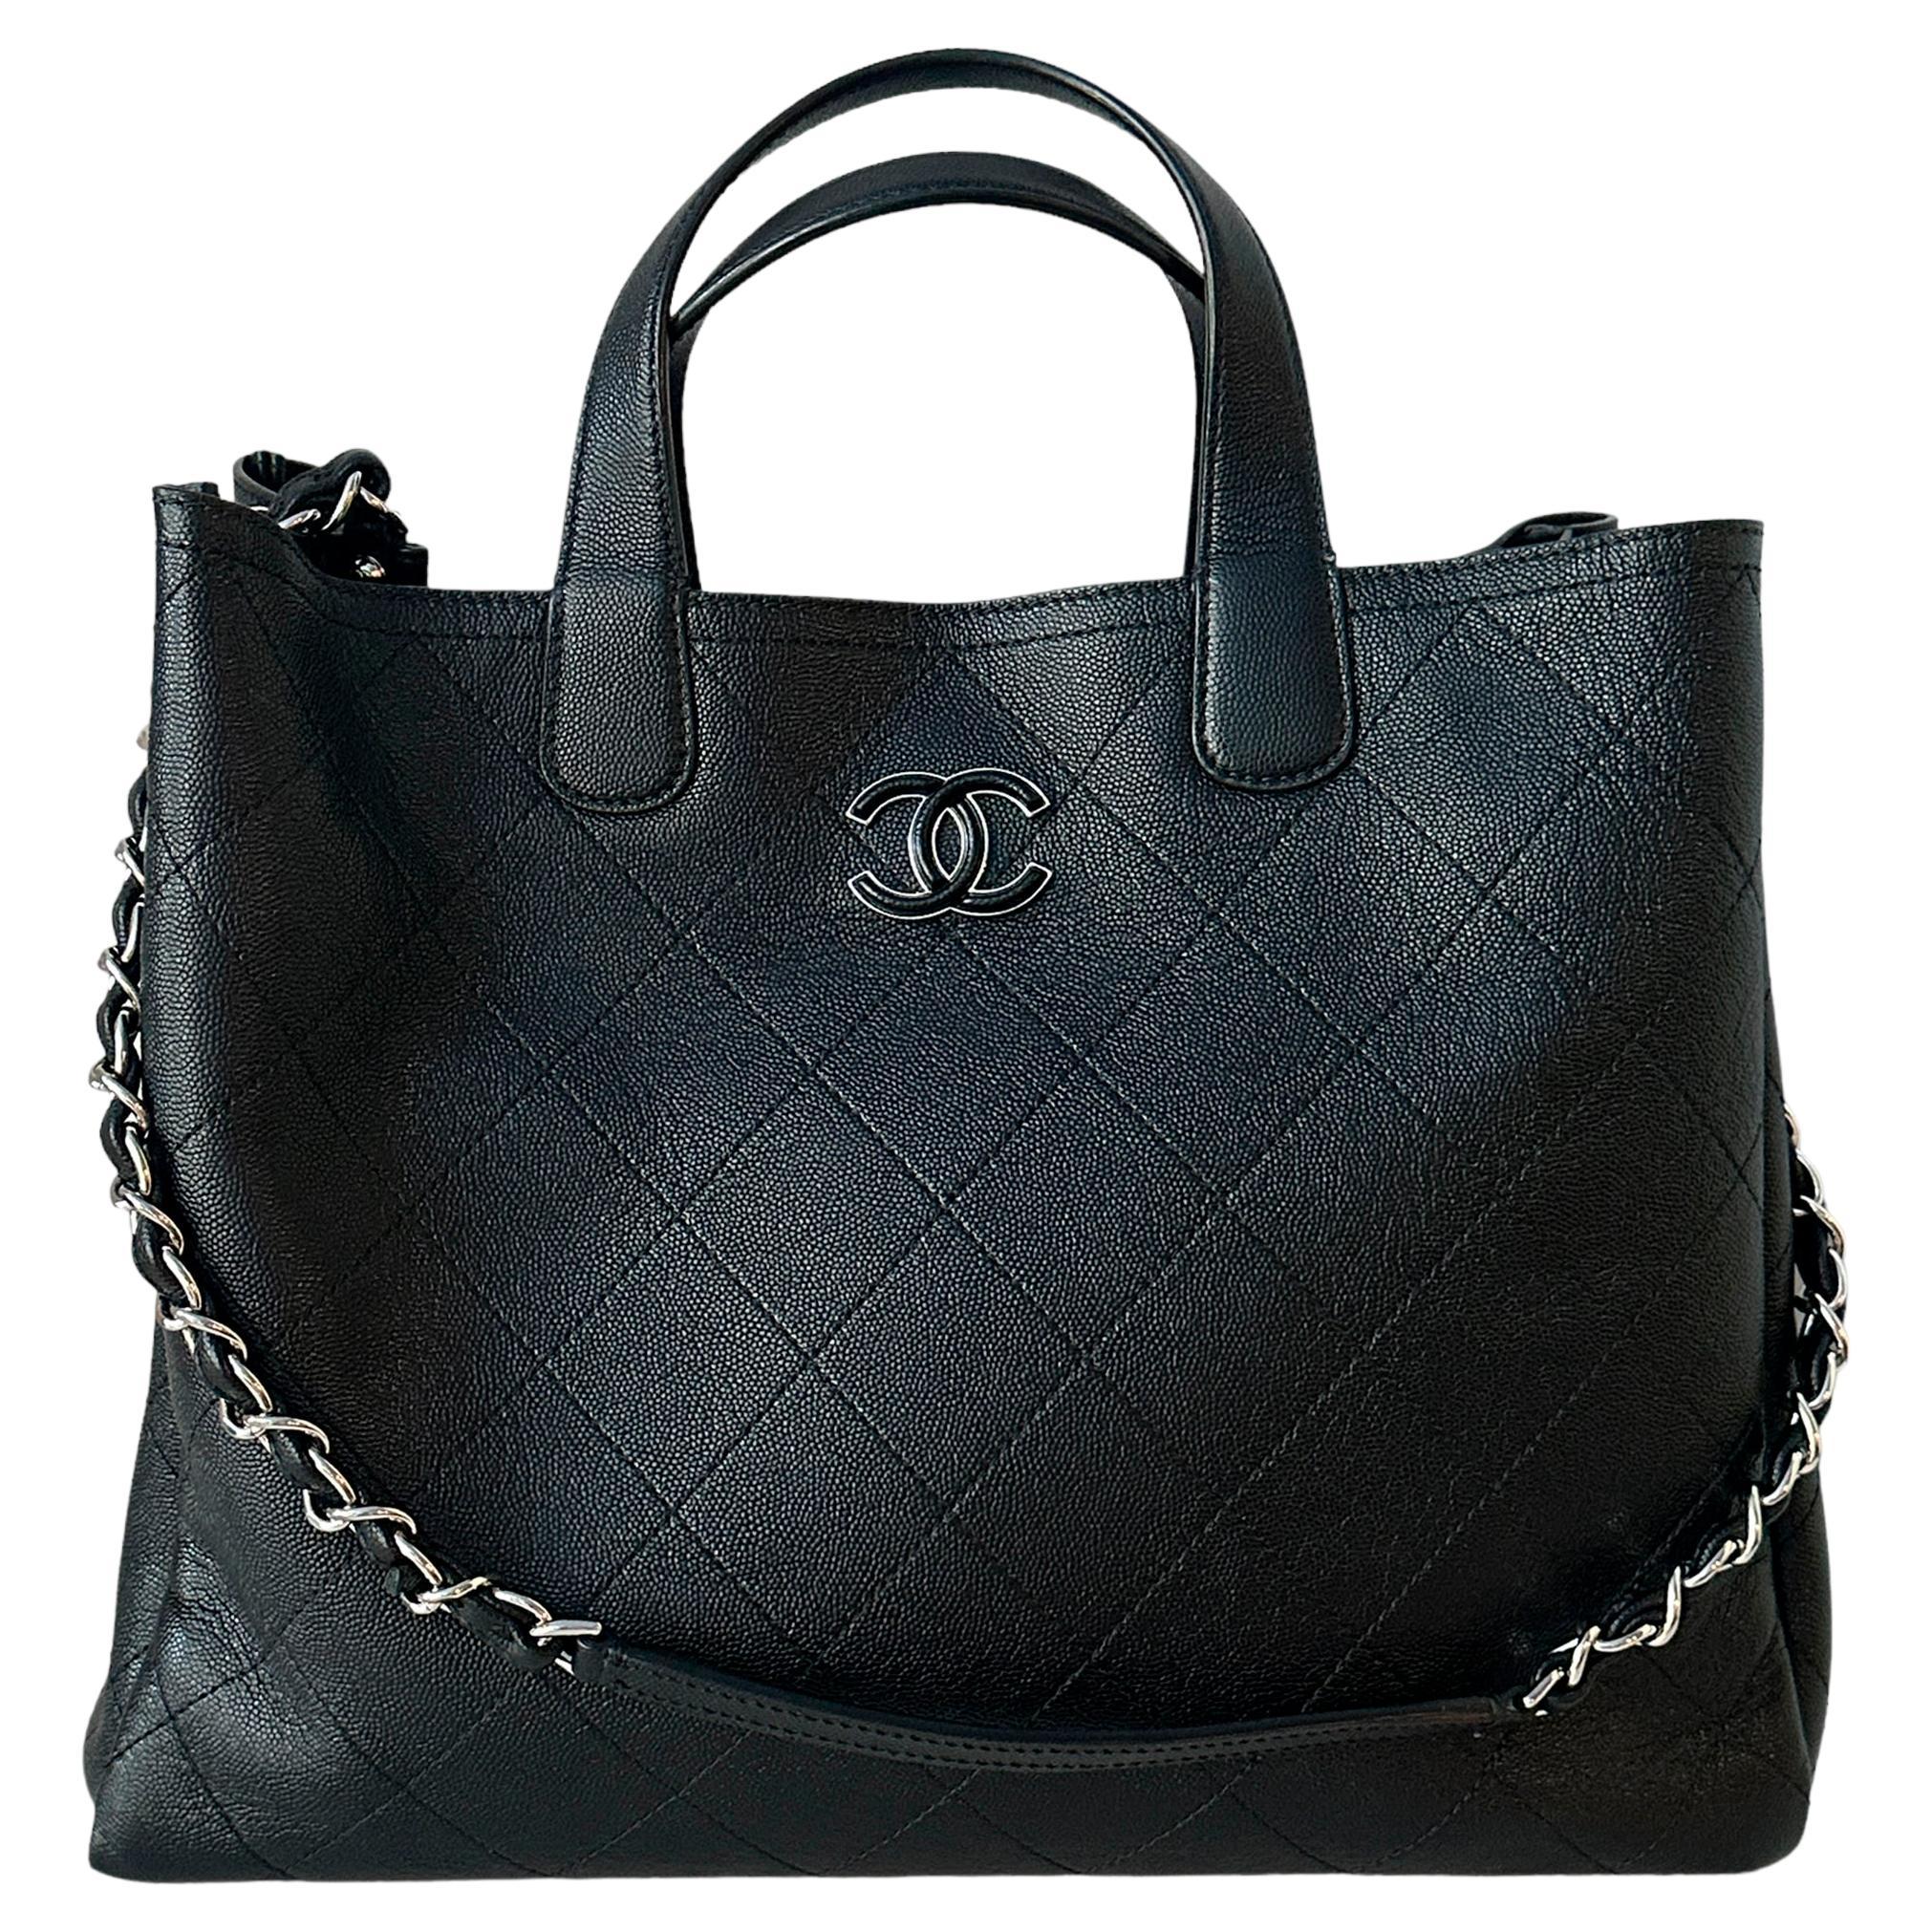 Chanel Black Caviar Leather Quilted CC Shopping Tote Bag For Sale